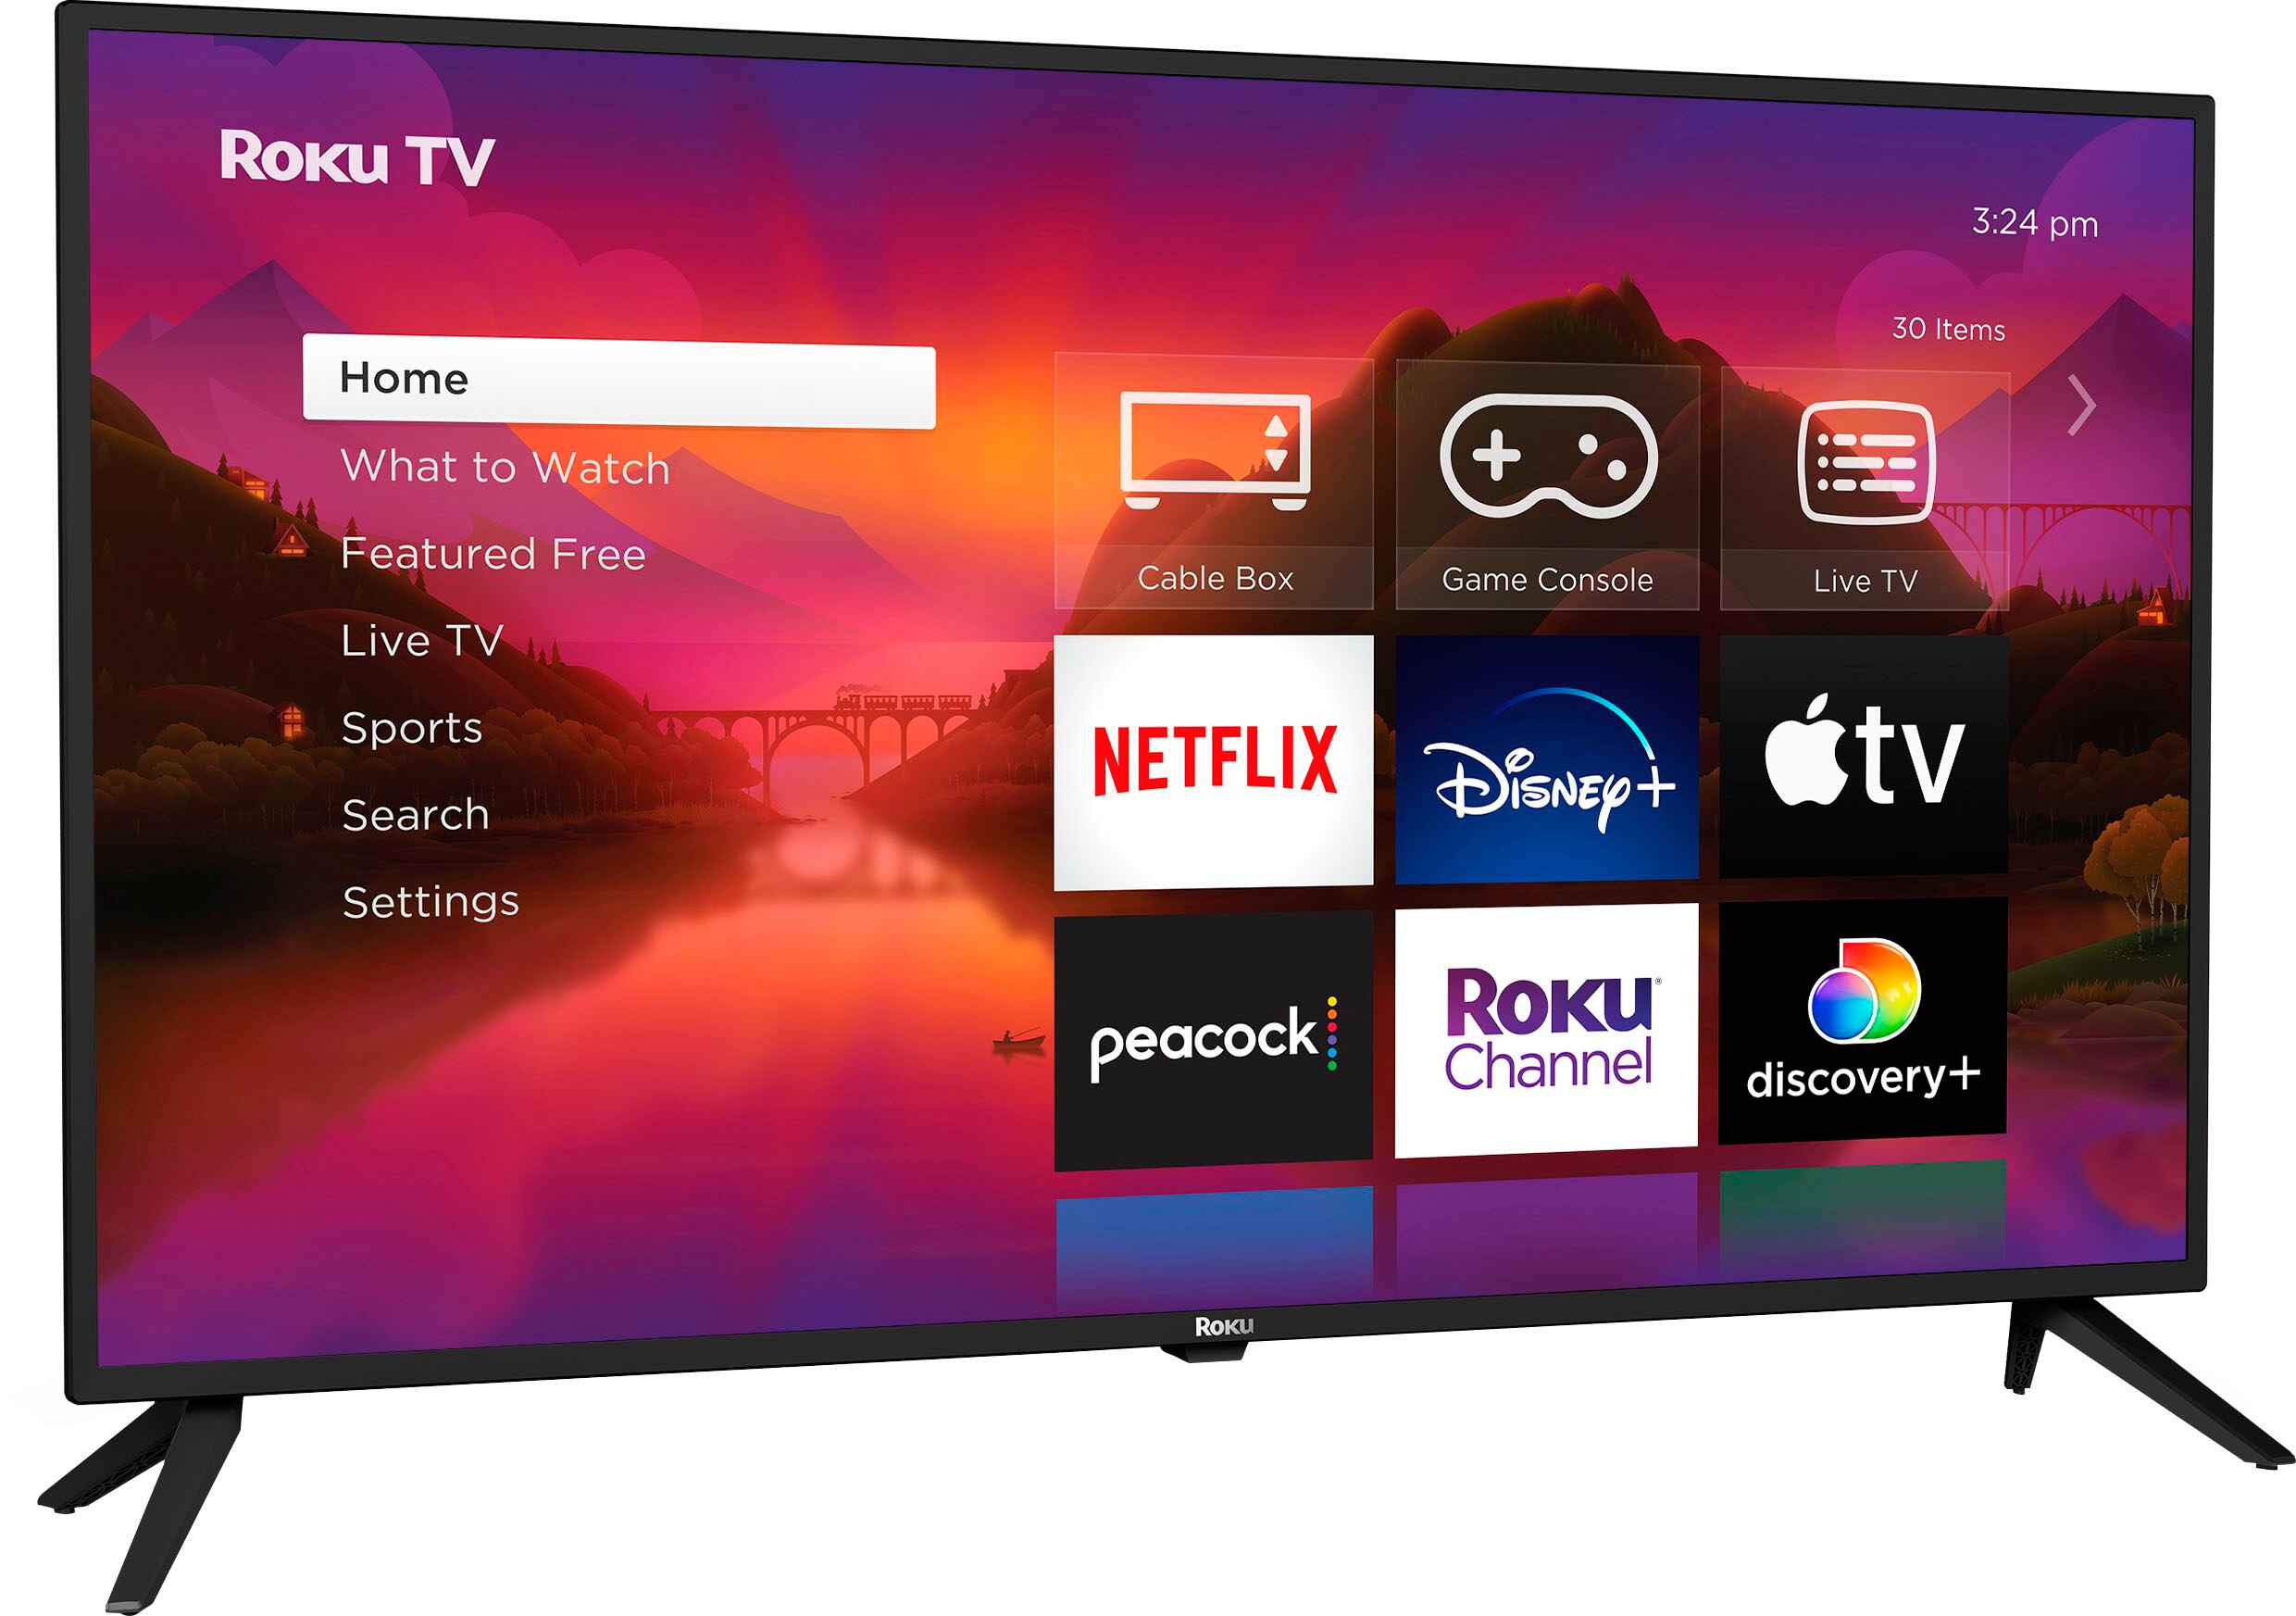 How To Sign Out Of Roku Tv